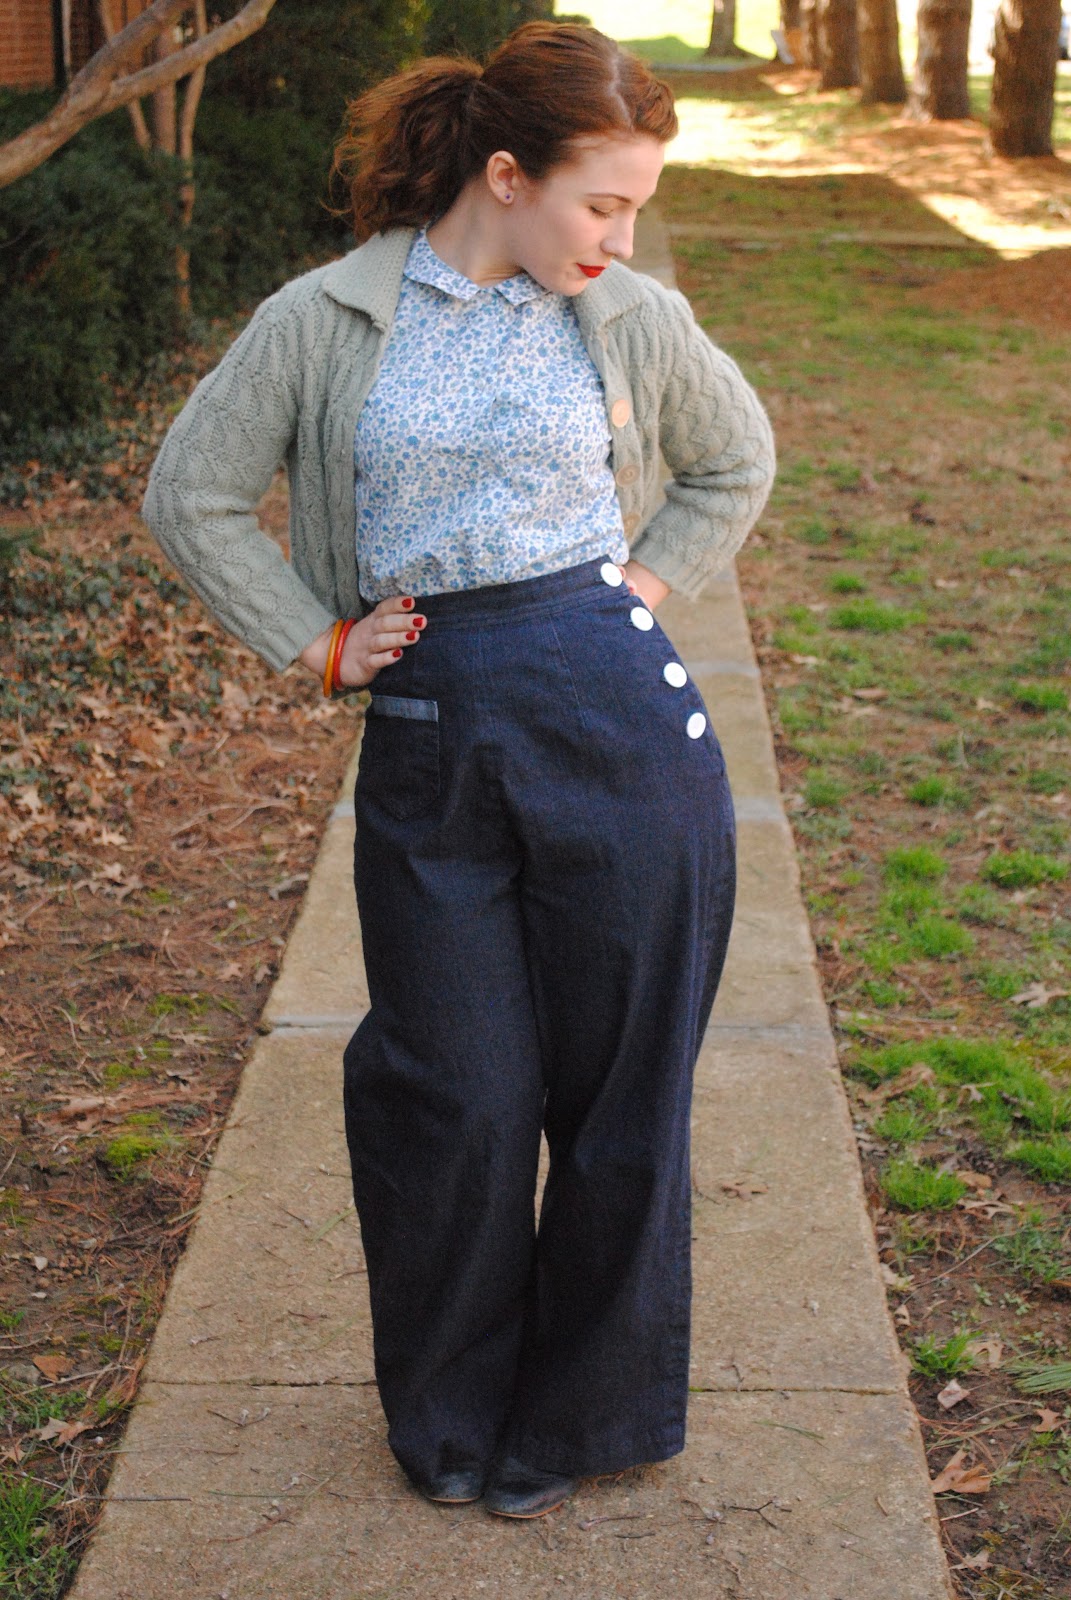 The Fiercest Lilliputian: A Good Pair Of Trousers